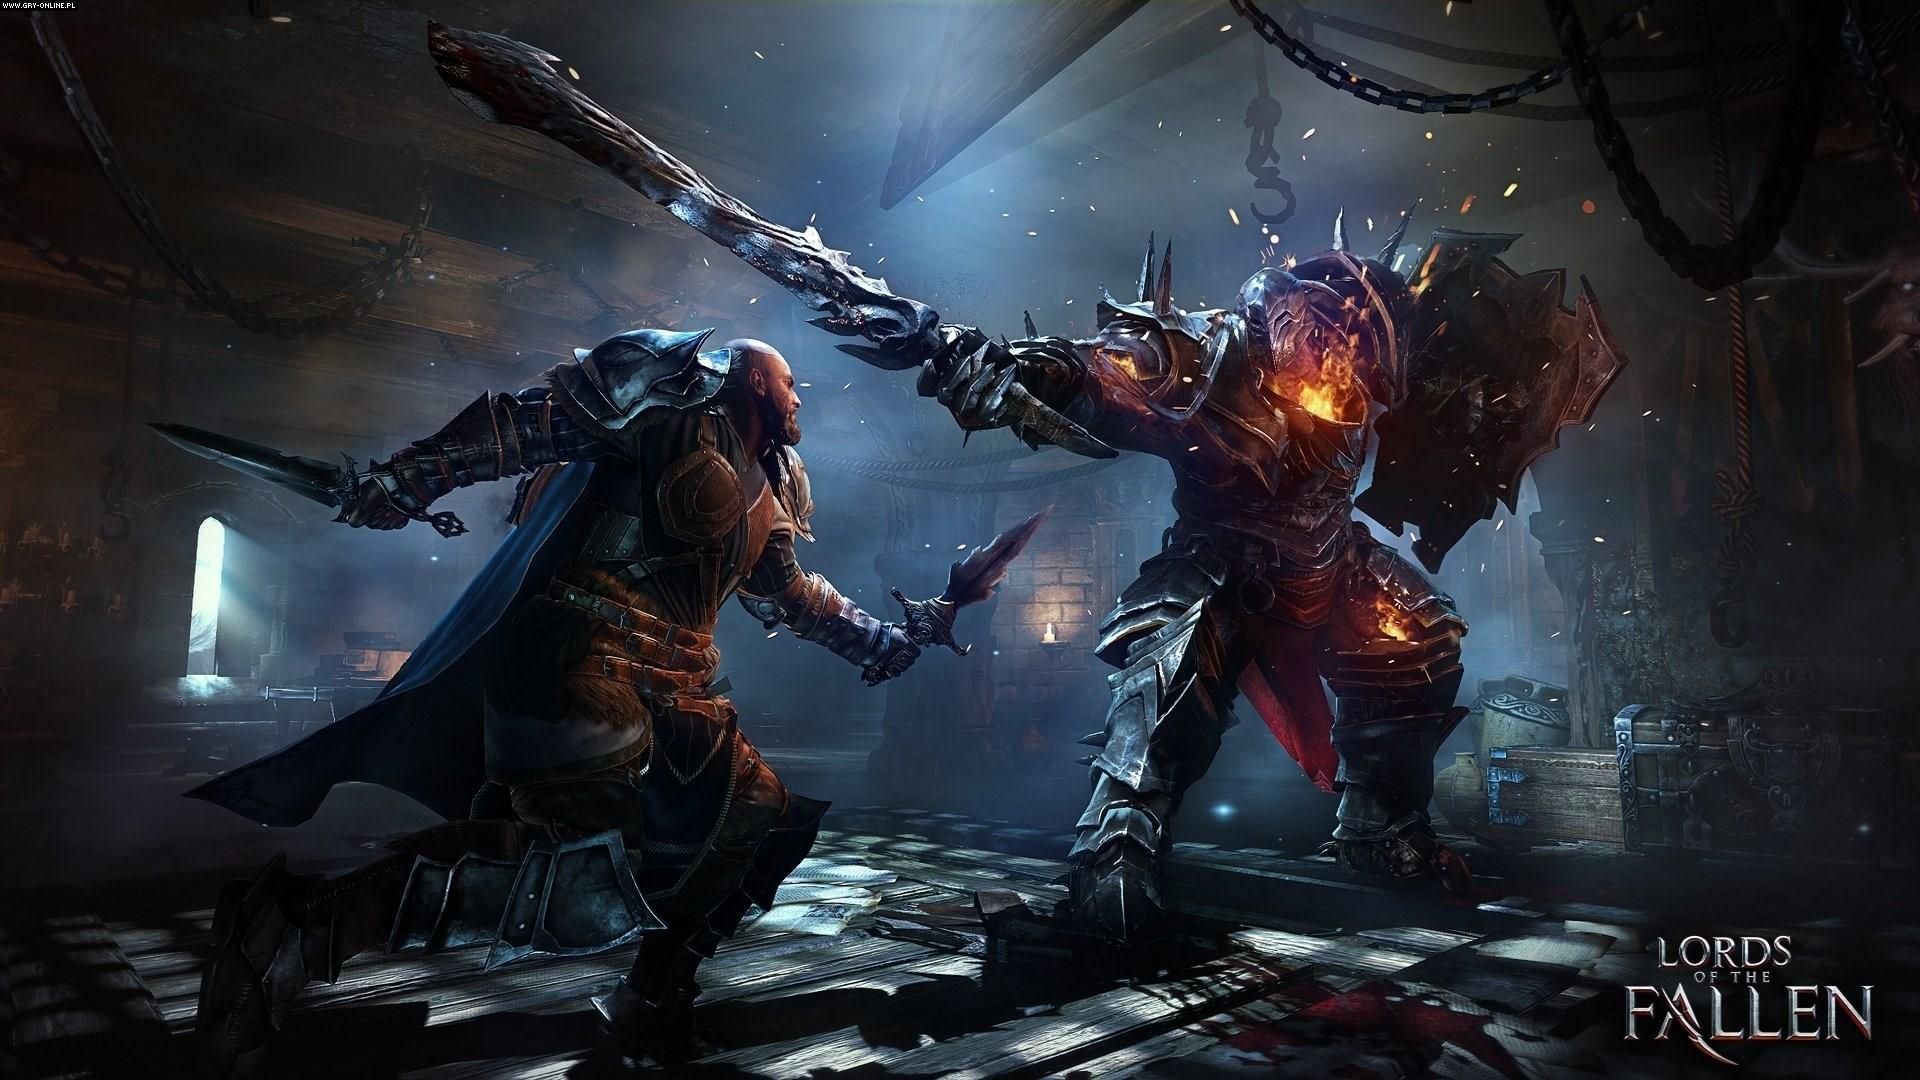 Jogo Lords of the Fallen (Complete Edition) - PS4 - Ci Games - Outros Games  - Magazine Luiza